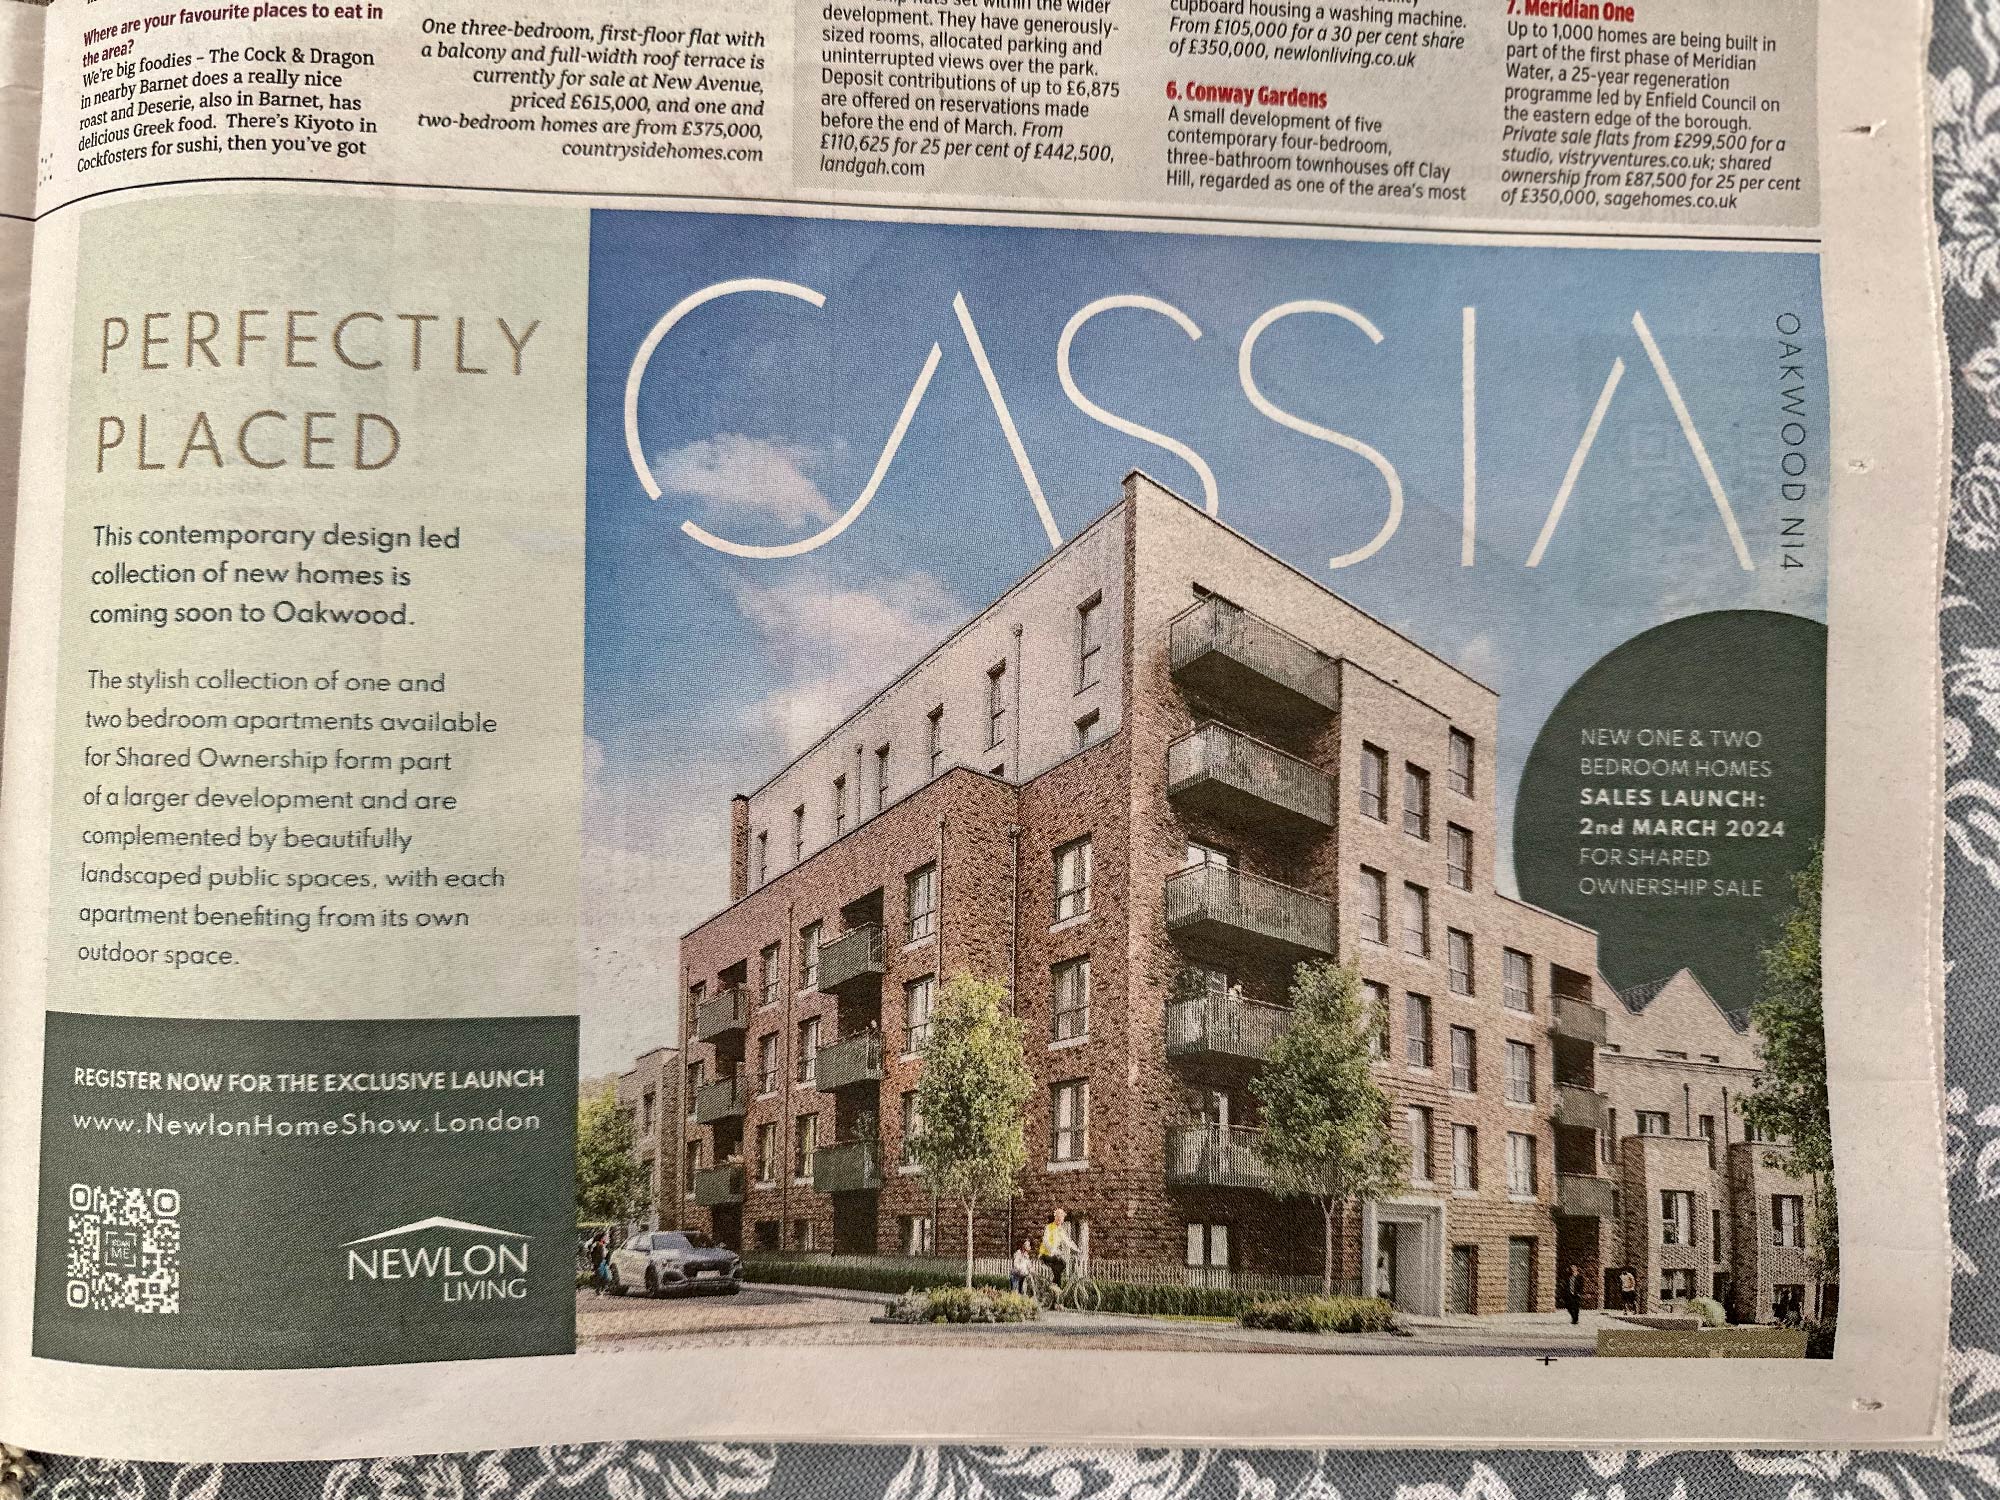 Cassia Shared Ownership homes launching this weekend